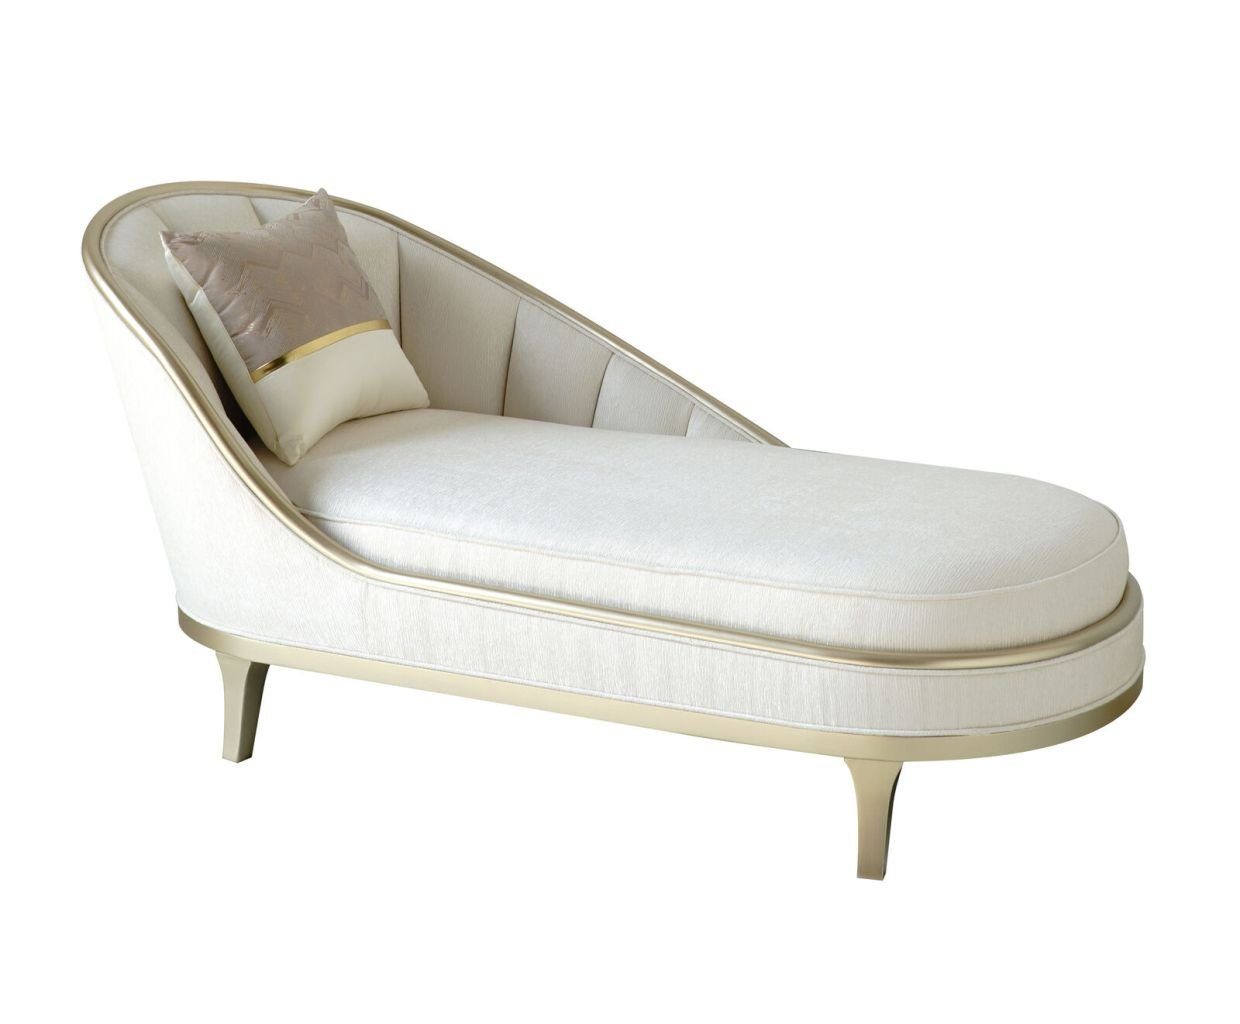 Europe Chaiselongue Luxus Chaise Chaiselounge Couch, in Moderner Wohnzimmer JVmoebel Liege Made